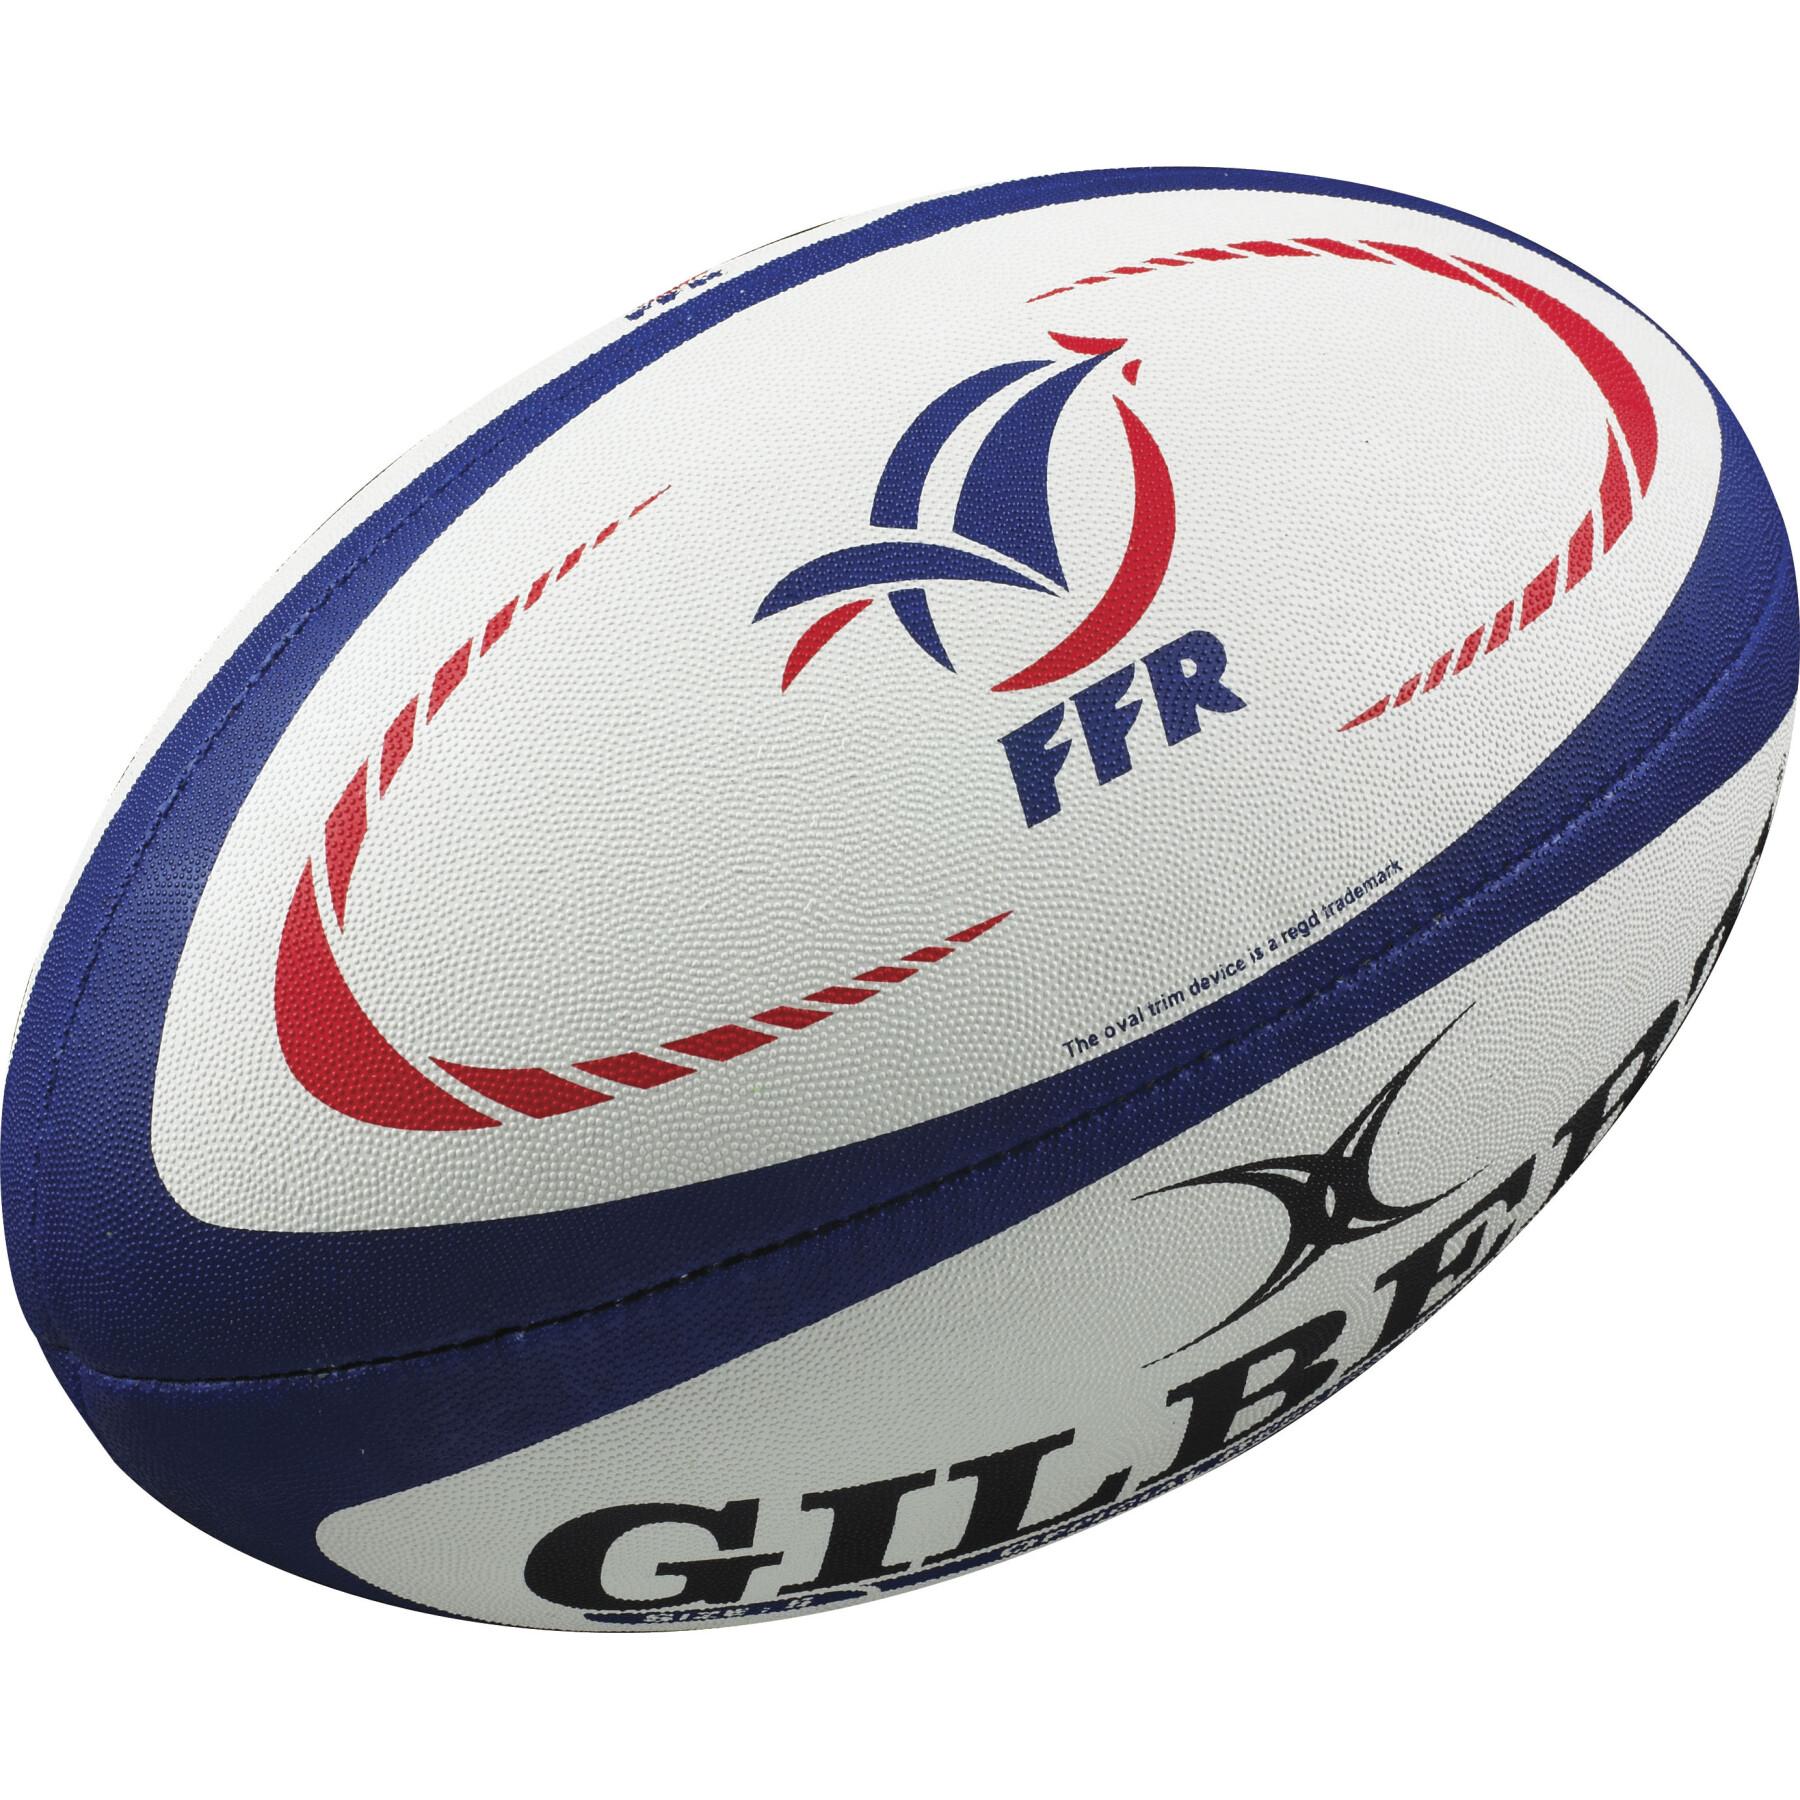 Pack of 10 Rugby balls France